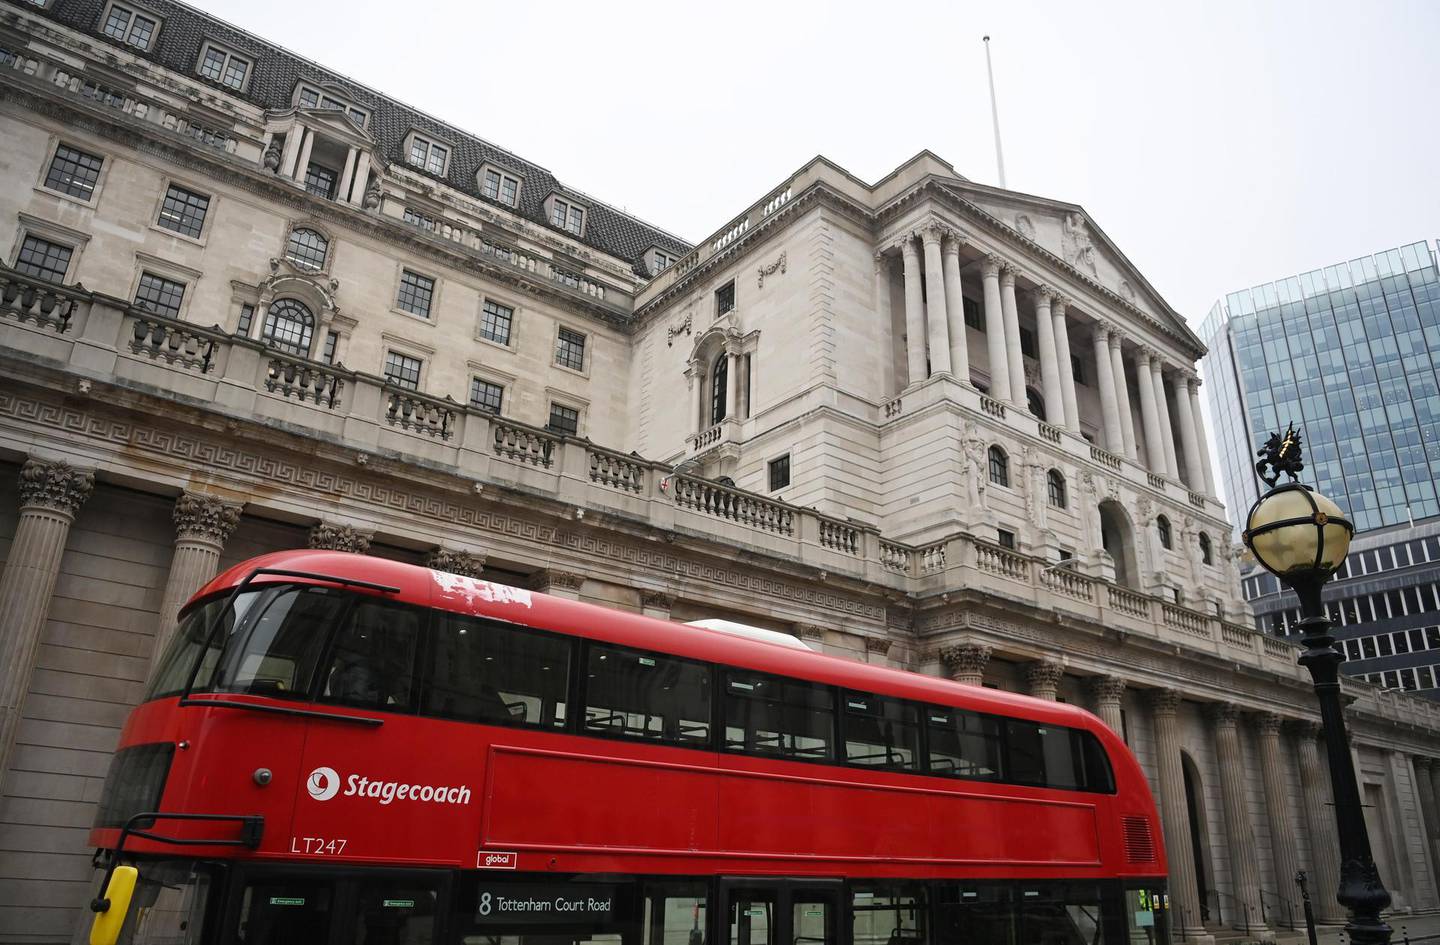 epa09046251 A bus passes the Bank of England in London, Britain, 02 March 2021. Britain's Chancellor of the Exchequer Rishi Sunak will deliver his budget on 03 March 2021. His statement to MPs in the House of Commons outlines the state of the economy and the government's plans for raising or lowering taxes. It also includes forecasts for how the UK economy could perform in future.  EPA/NEIL HALL